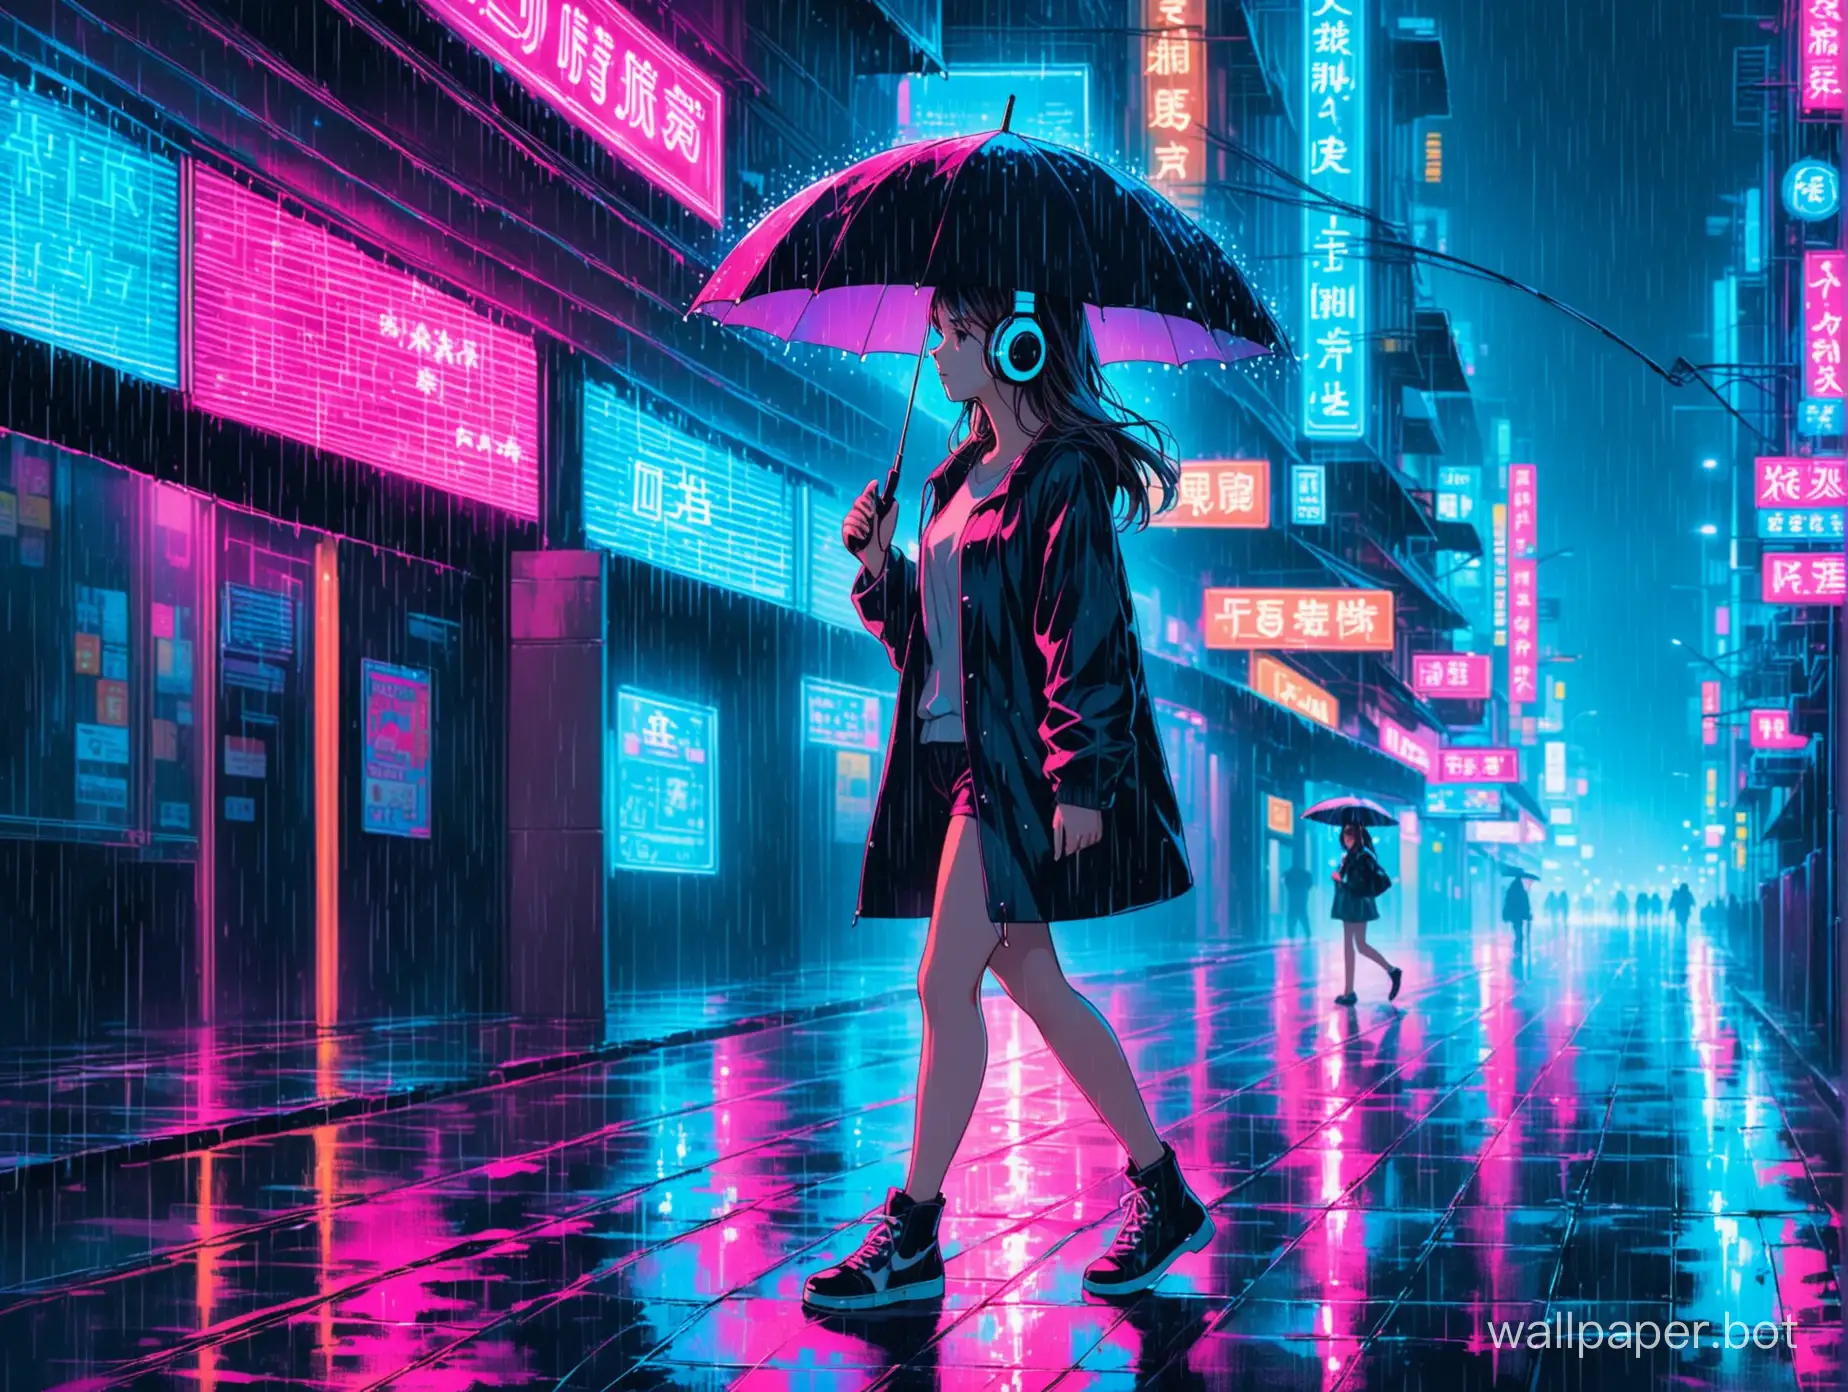 Girl with headphones walking the rainy street with an umbrella at nighttime city blue neon lights side view